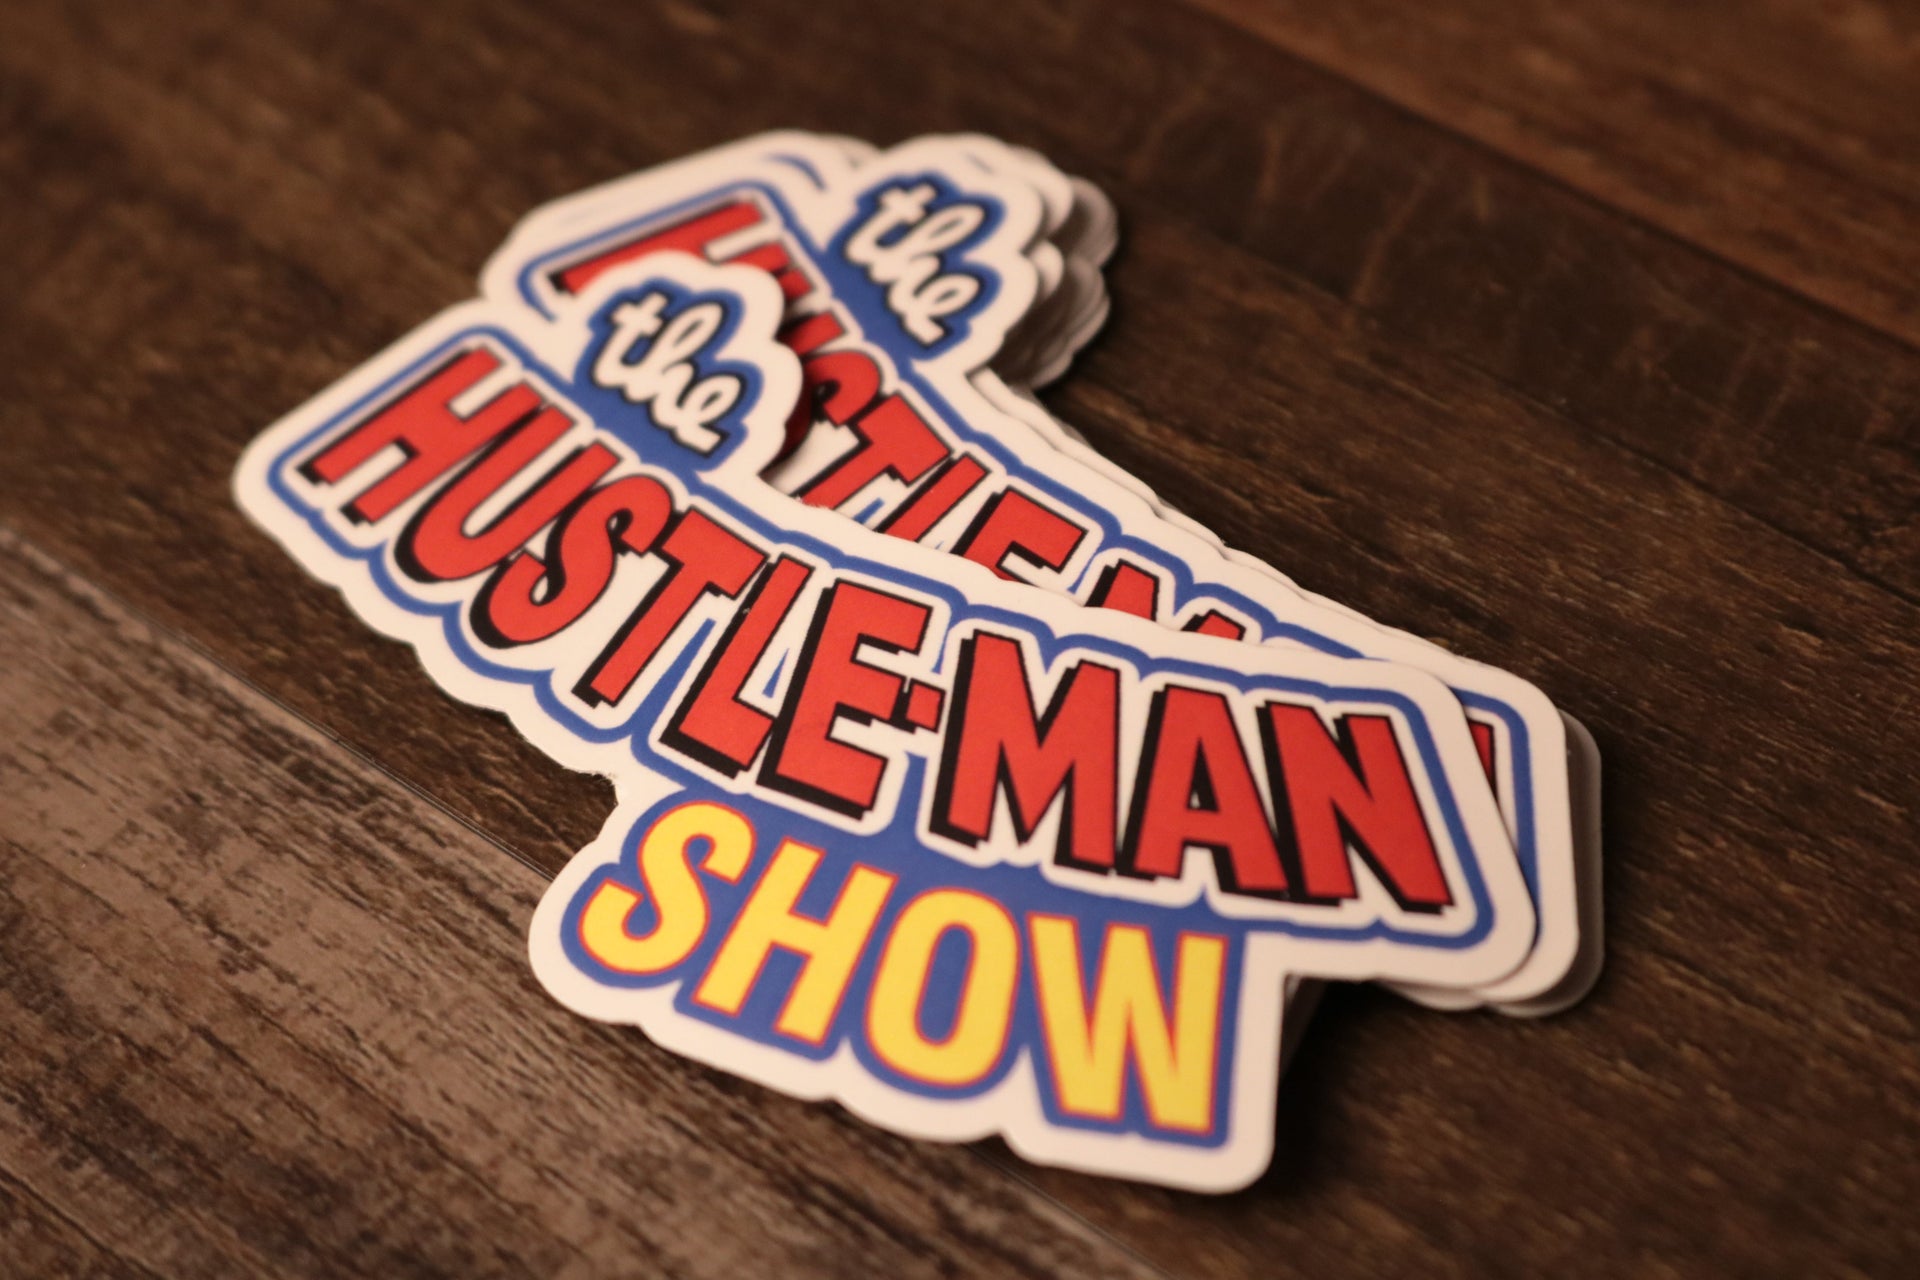 The Hustle-Man Show Sticker | The Hustle-Man Show Podcast Sticker you can stick this hustle-man sticker wherever you would like